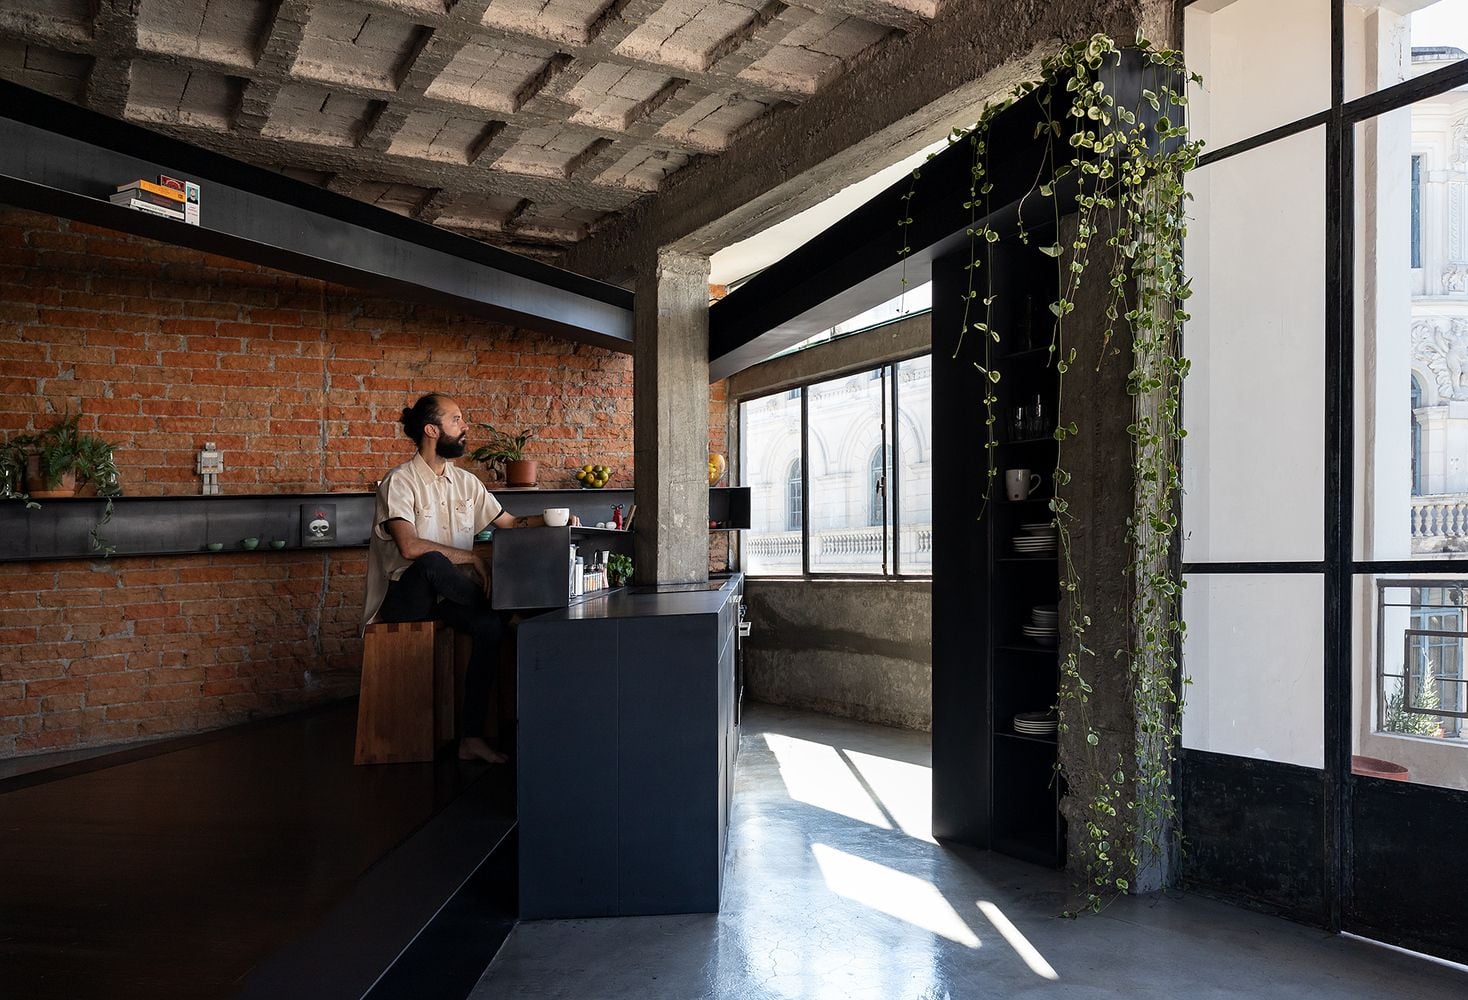 Subtle green accents, like the vine crawling down the beam on the right here, go beautifully with the apartment's brick and concrete textures. 